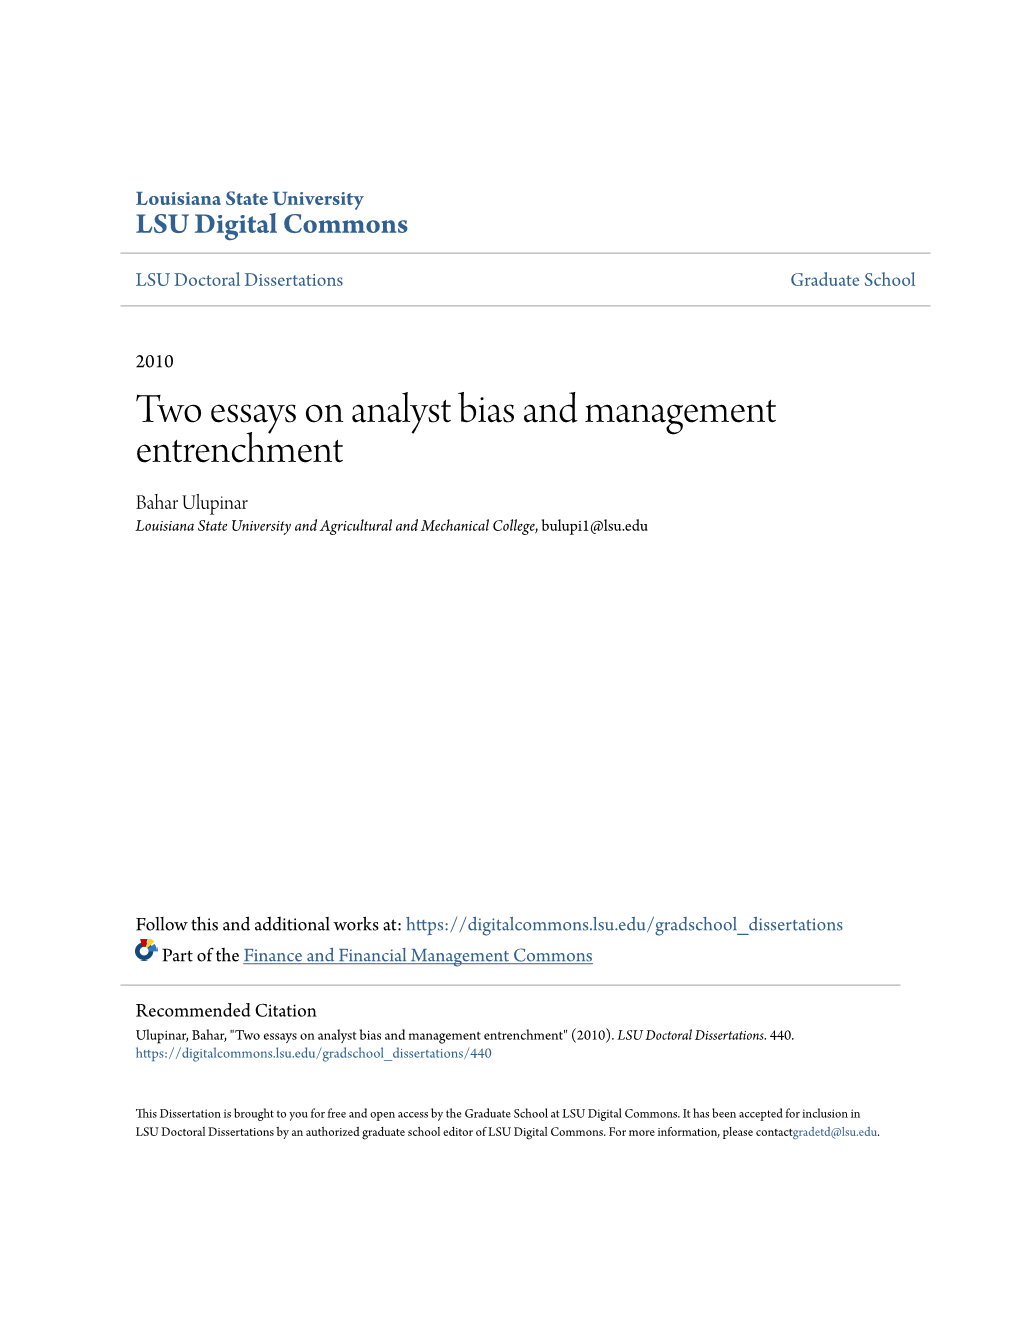 Two Essays on Analyst Bias and Management Entrenchment Bahar Ulupinar Louisiana State University and Agricultural and Mechanical College, Bulupi1@Lsu.Edu